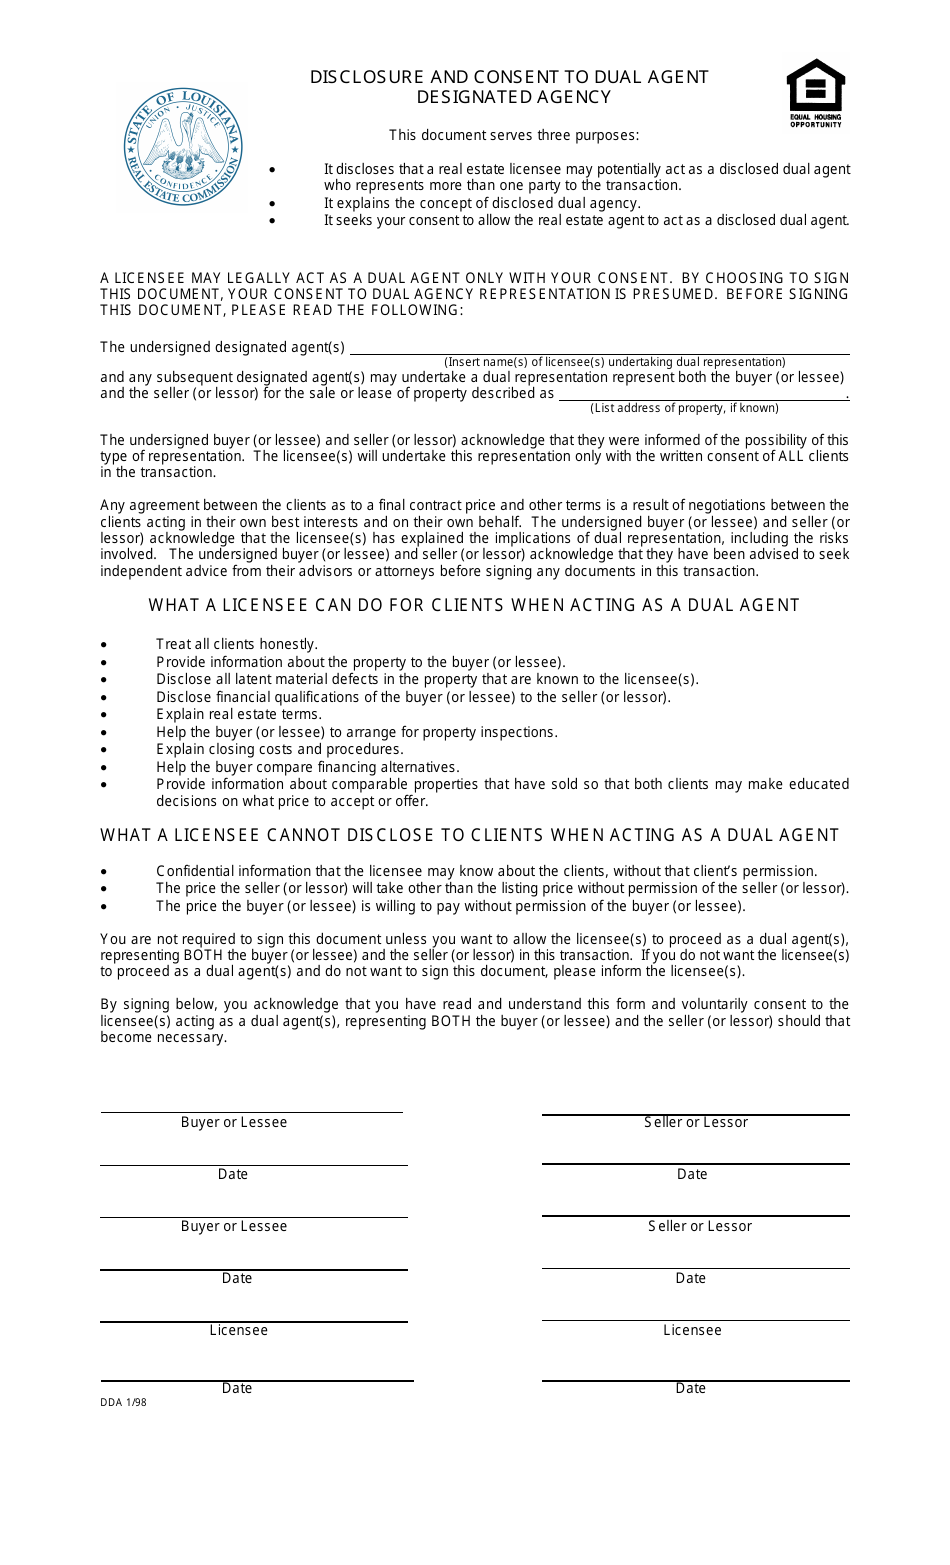 Louisiana Disclosure And Consent To Dual Agent Designated Agency Fill Out Sign Online And 7234